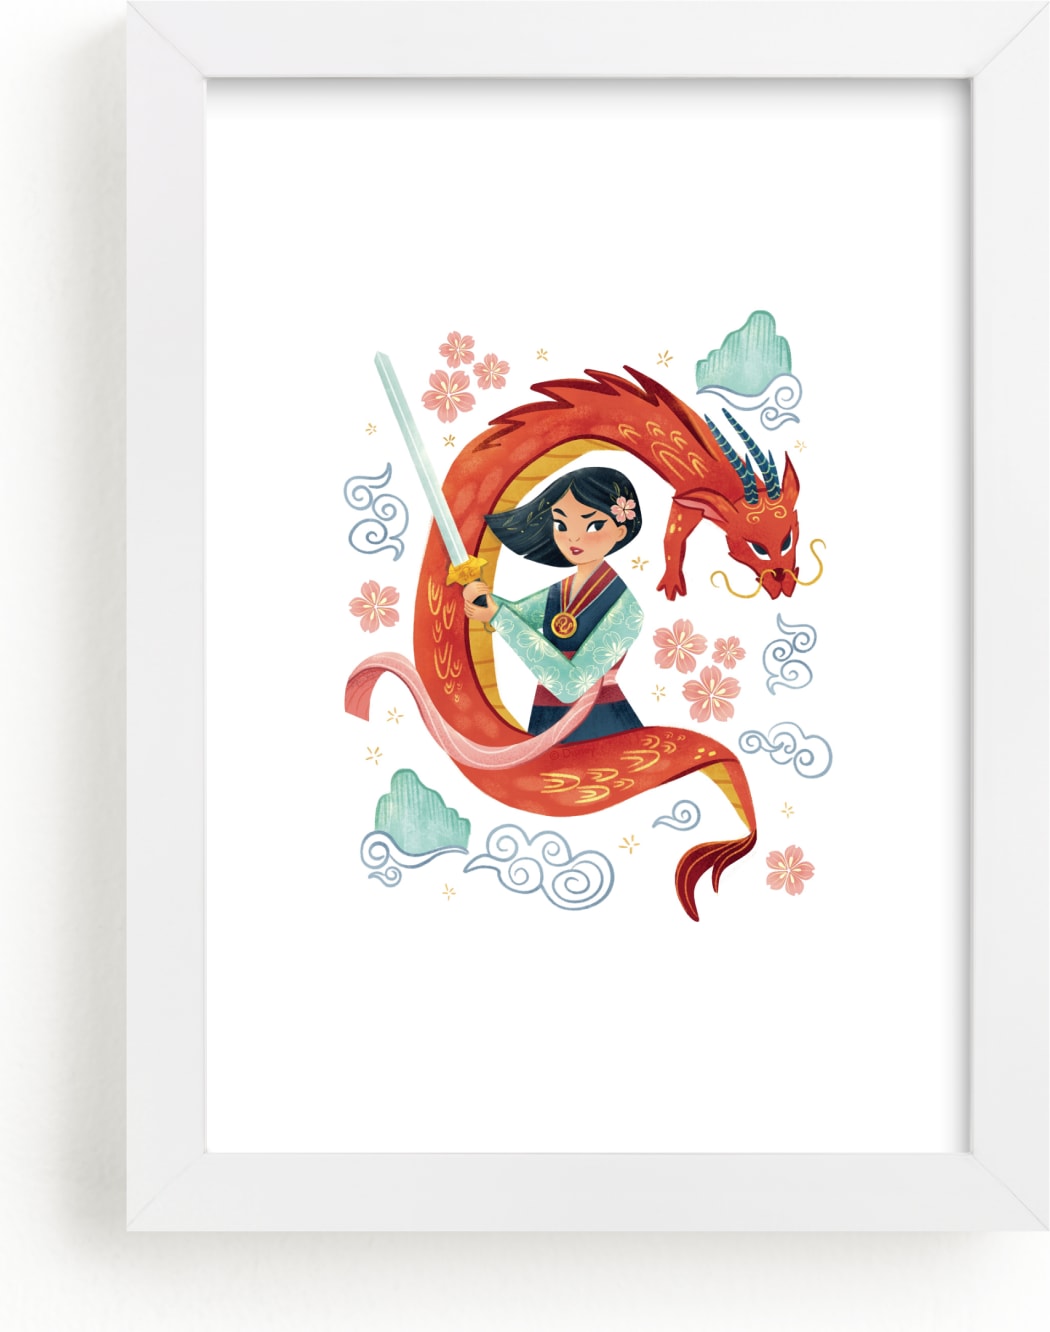 This is a colorful, green, red disney art by curiouszhi called Disney's Warrior Princess Mulan.